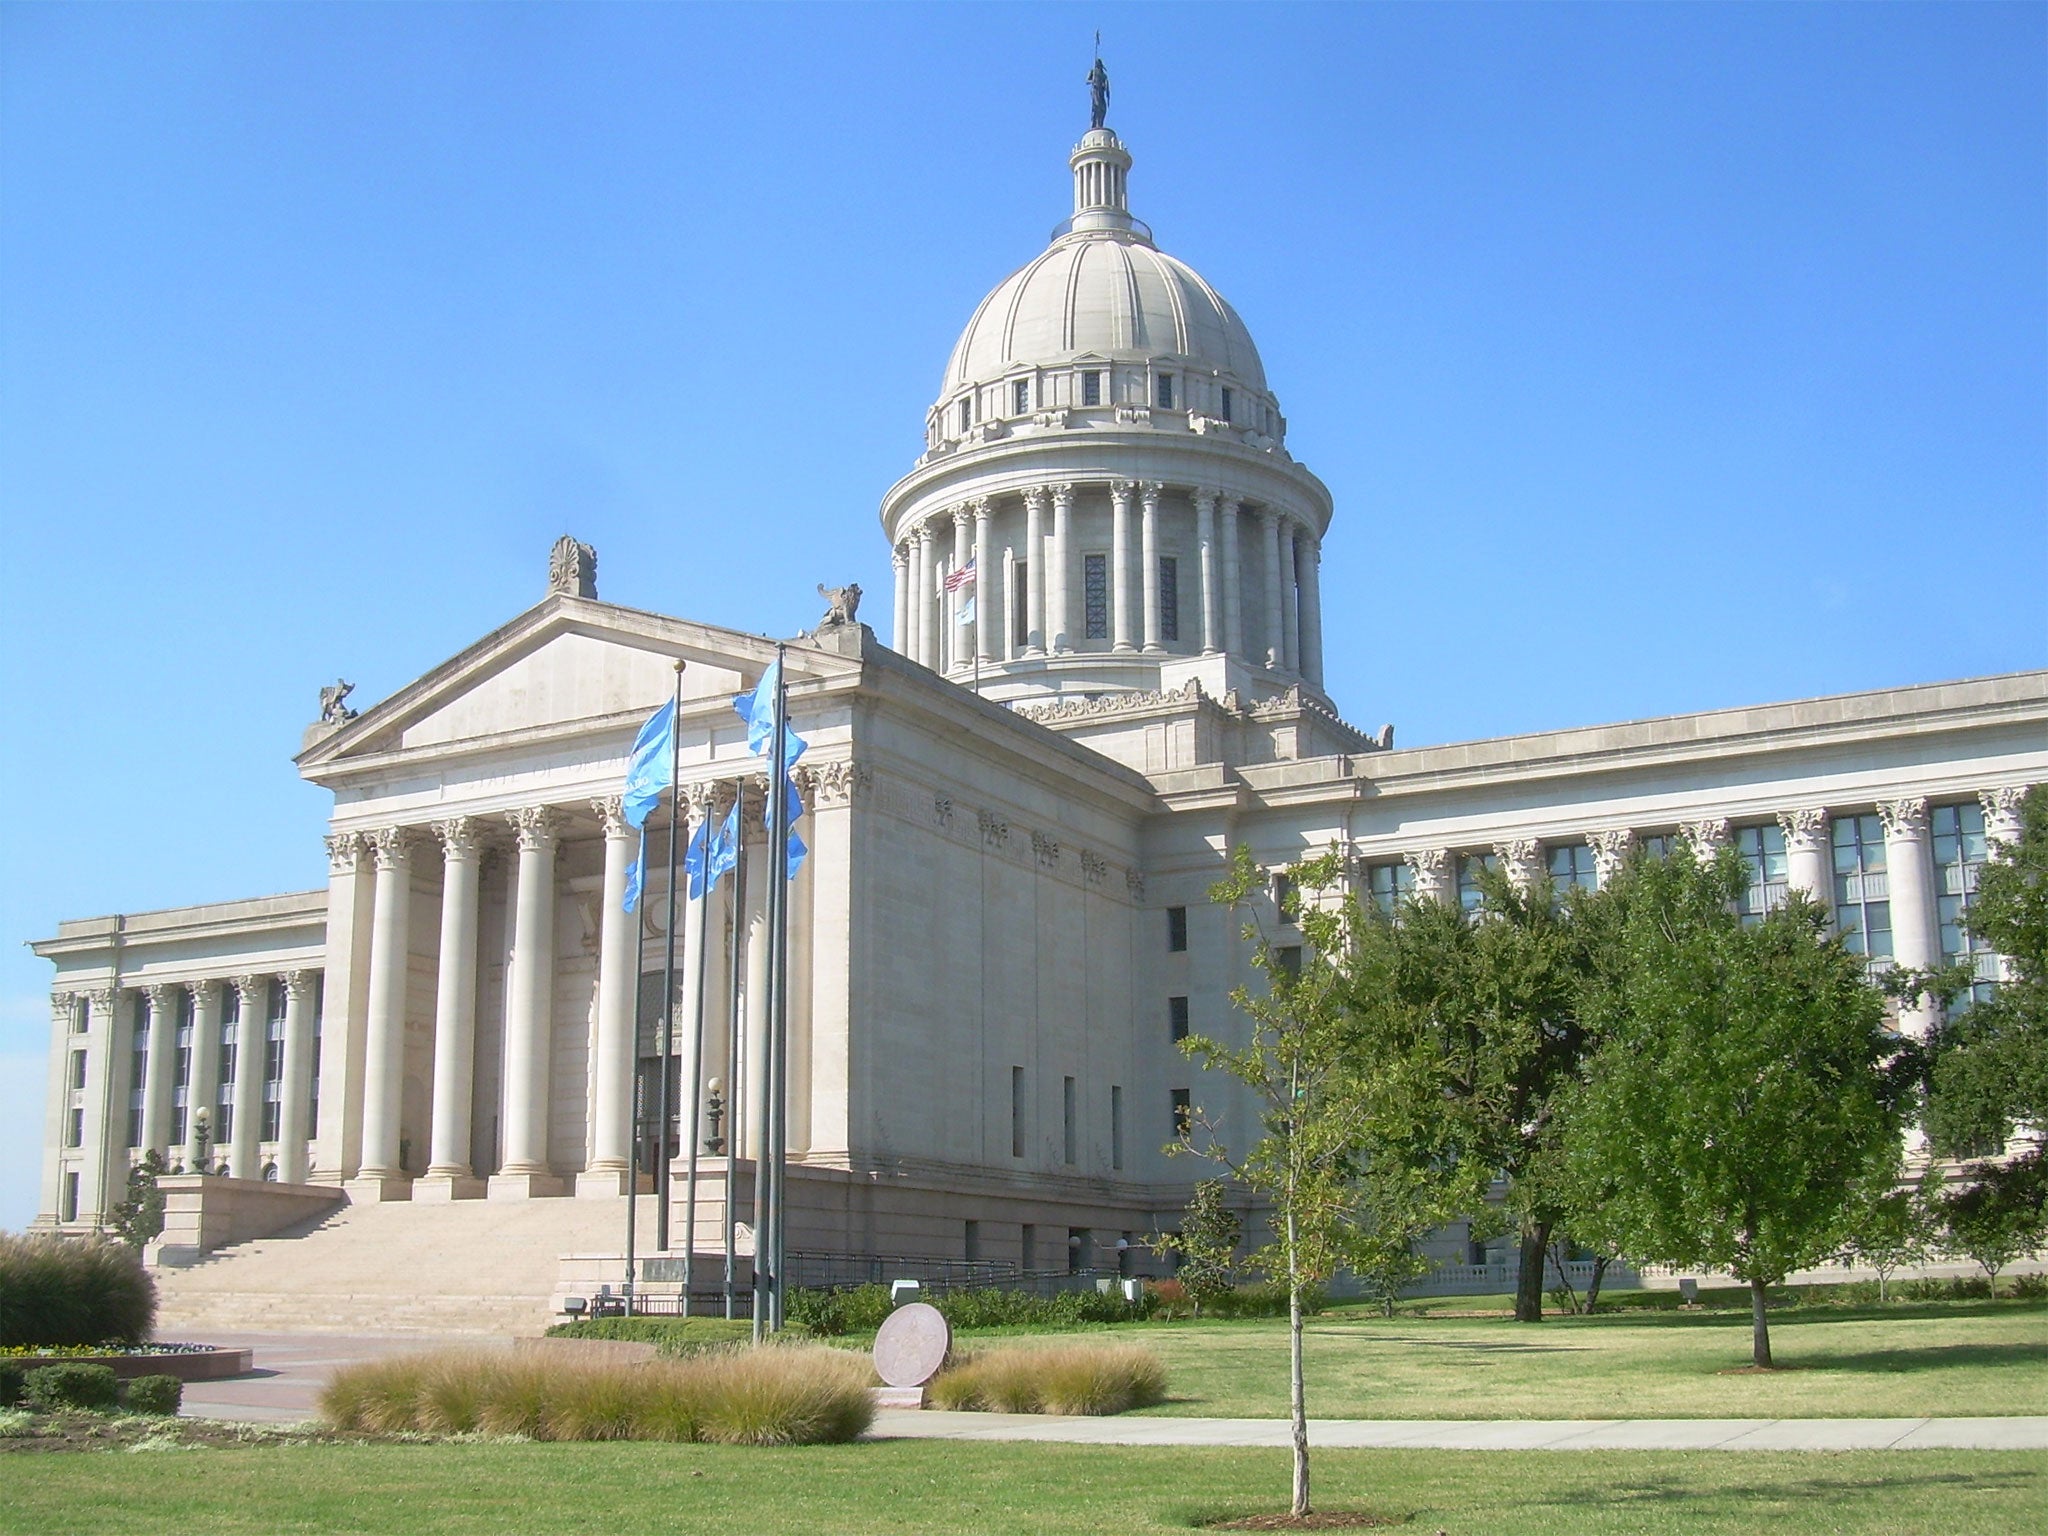 The Oklahoma State Capitol, where the state's court of appeal met up until 2011